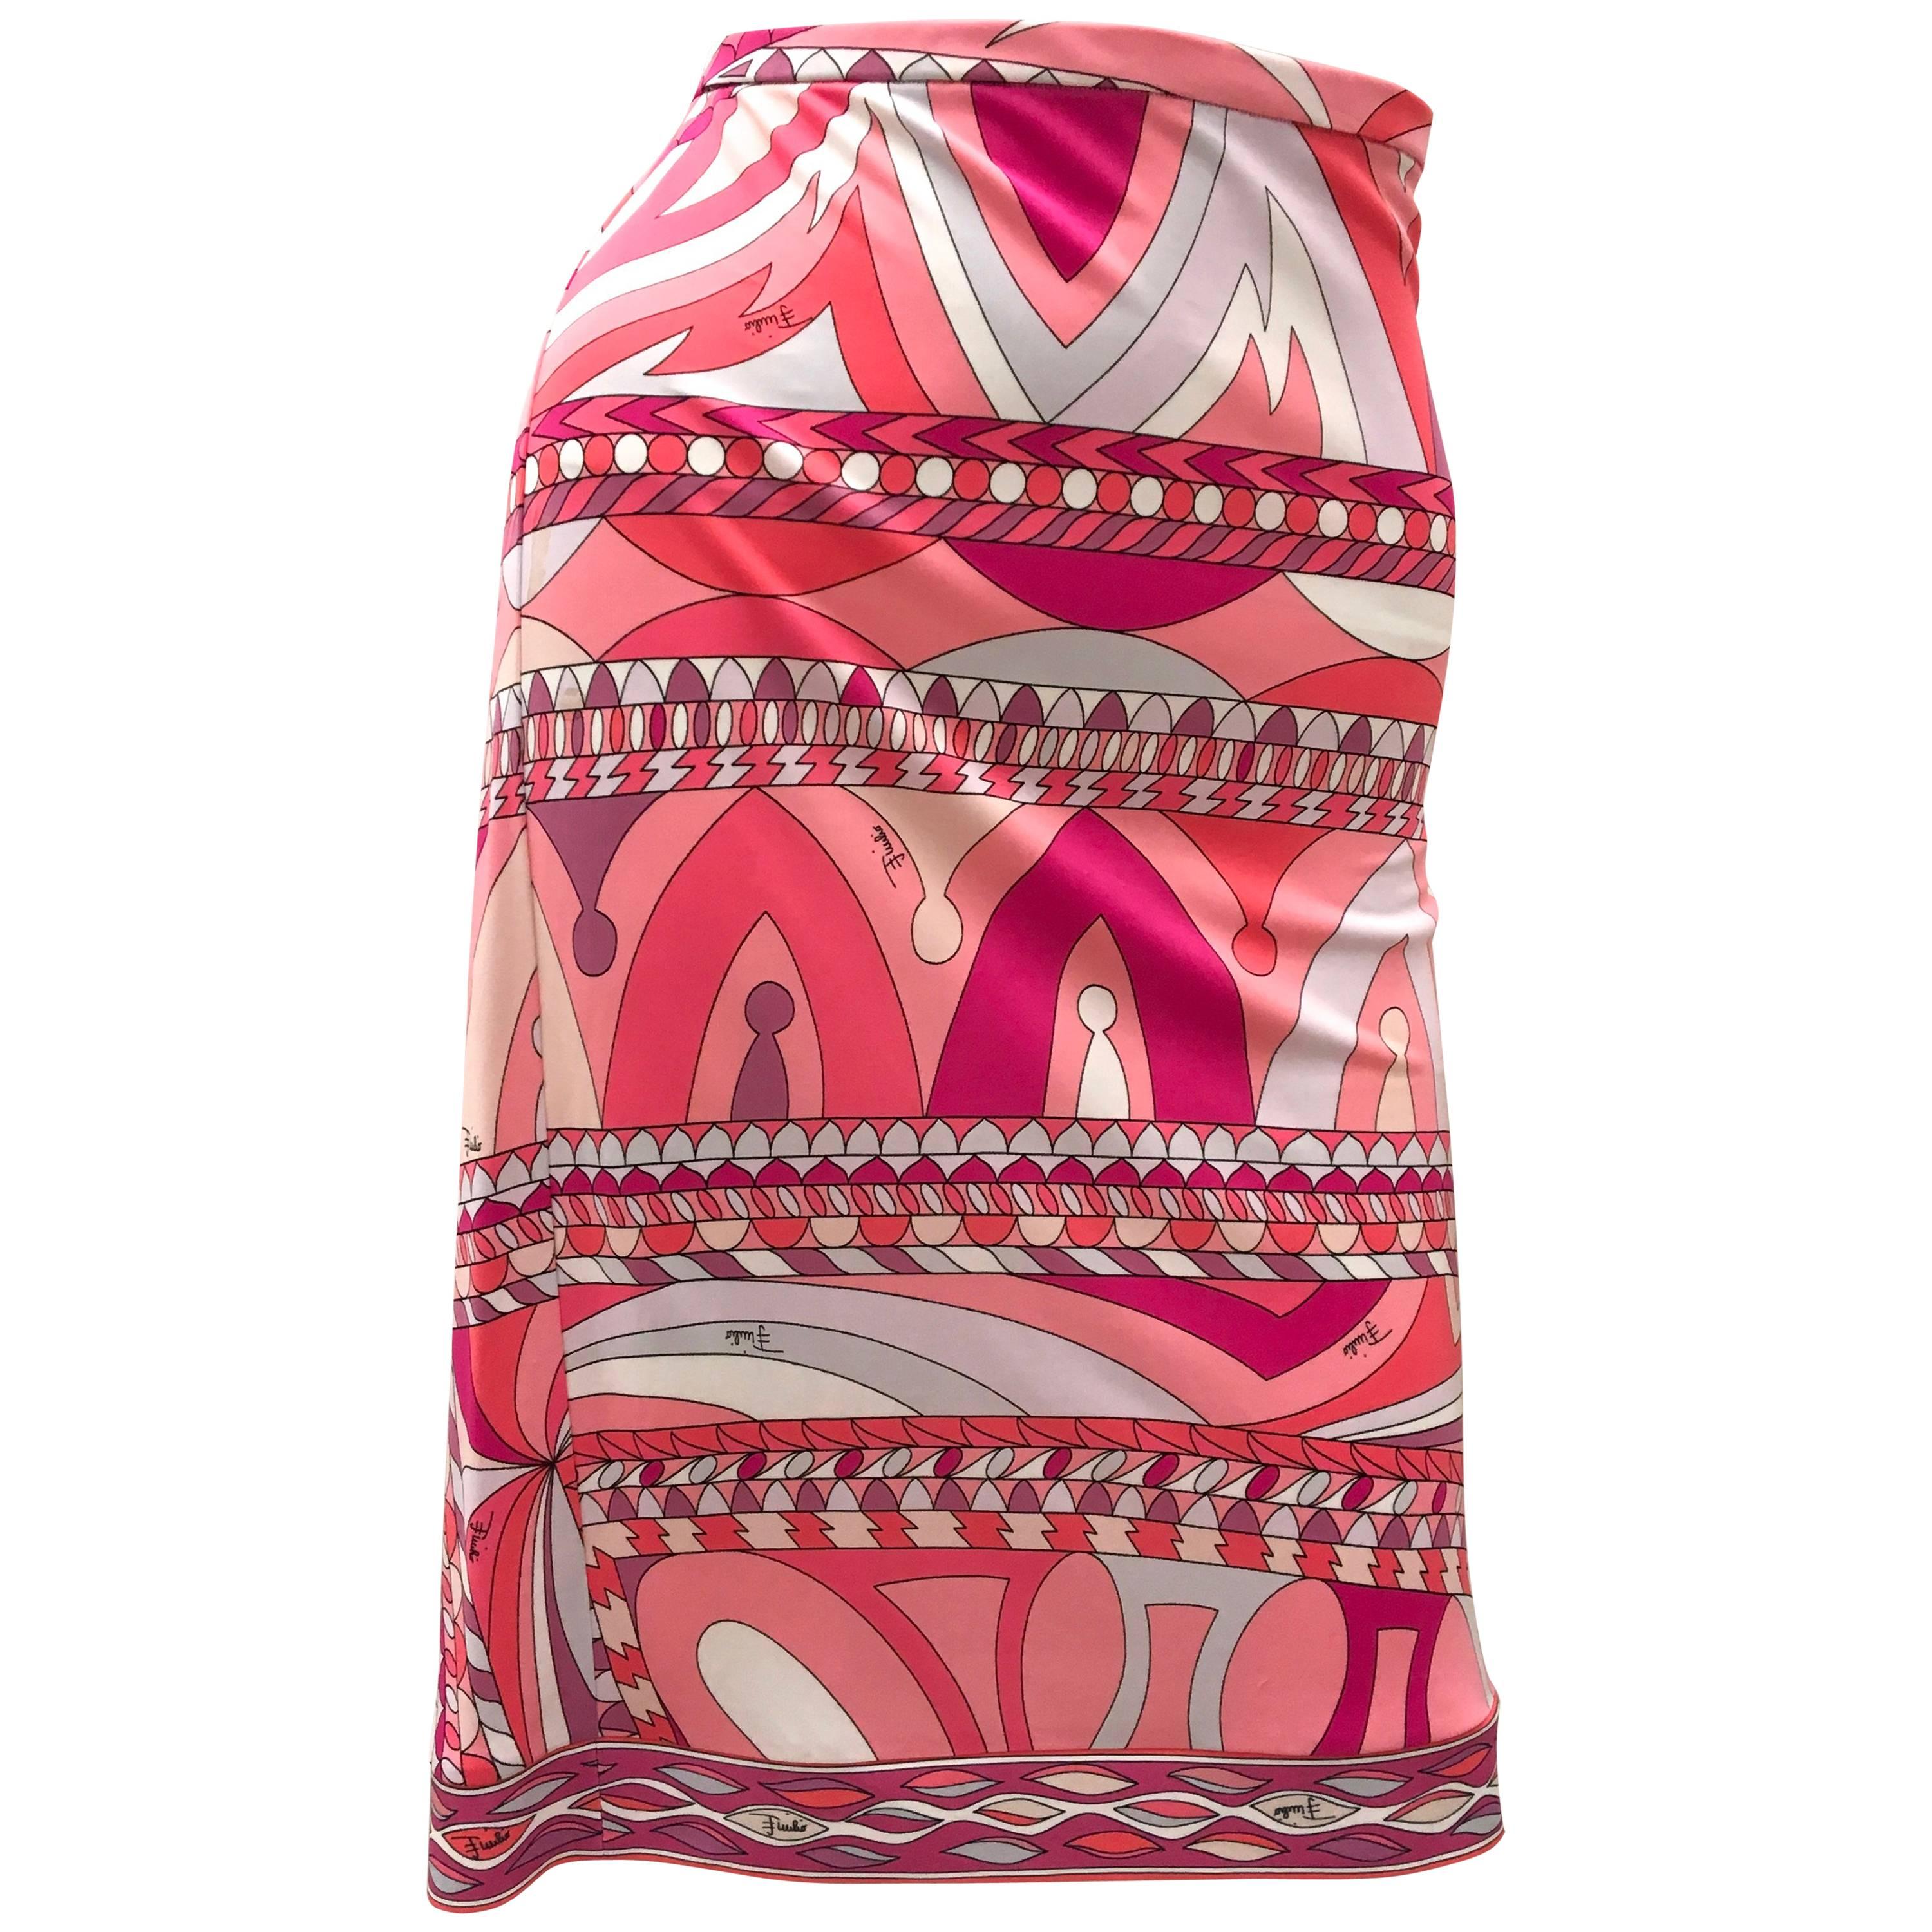 New Emilio Pucci Skirt w/ Tags